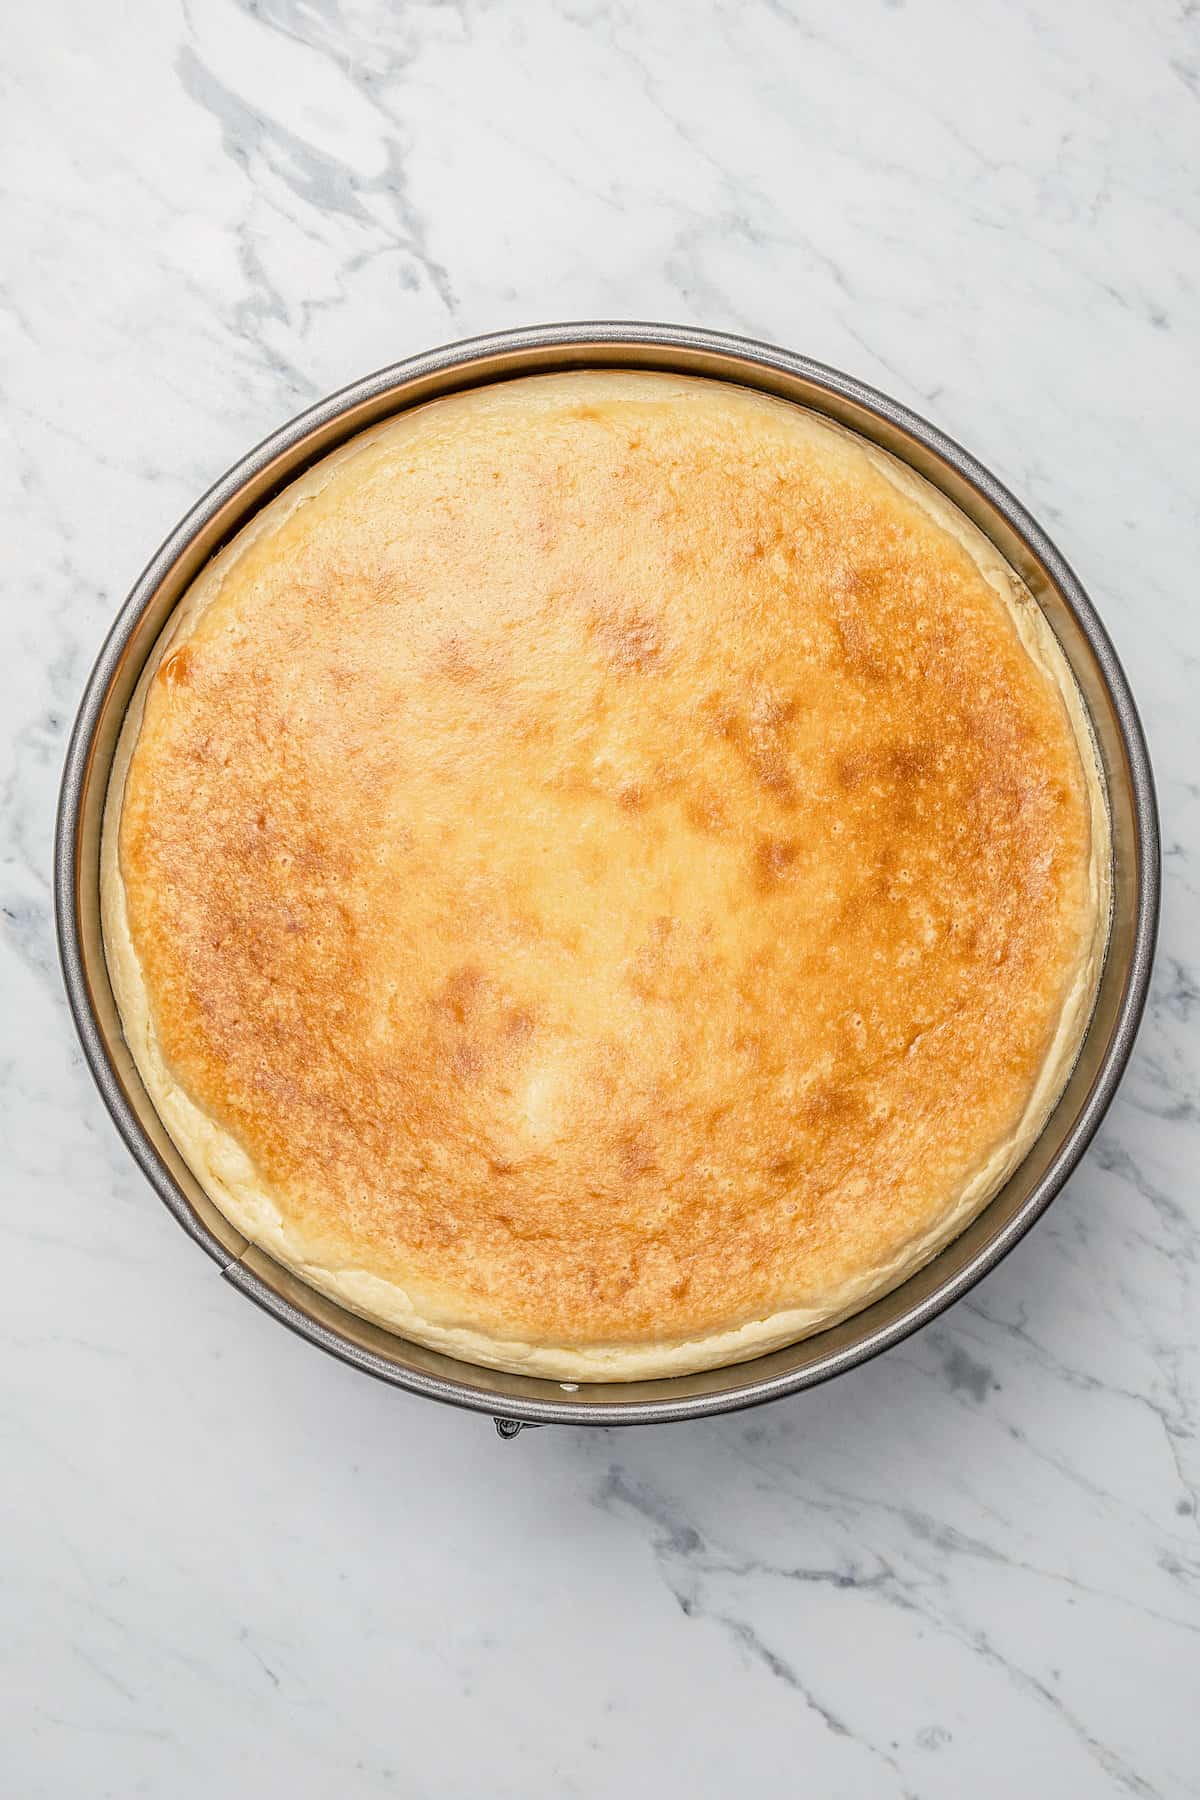 Baked cheesecake in a springform pan.